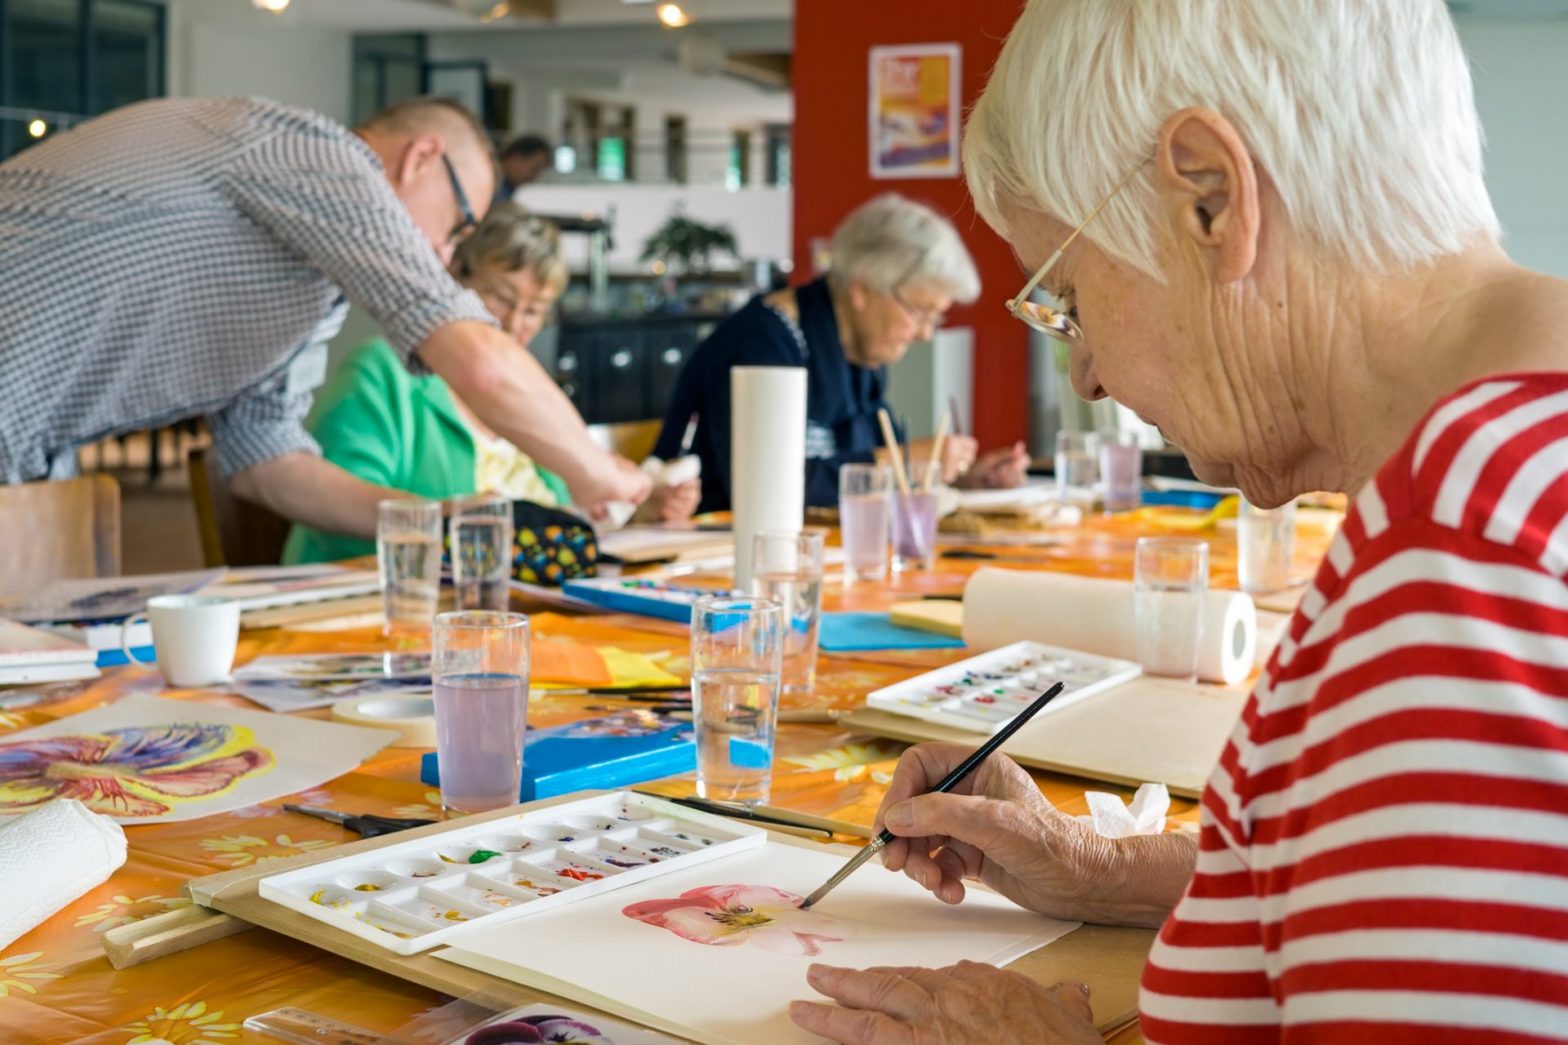 Senior adults engaged in a painting class, focusing on watercolor techniques and social interaction.